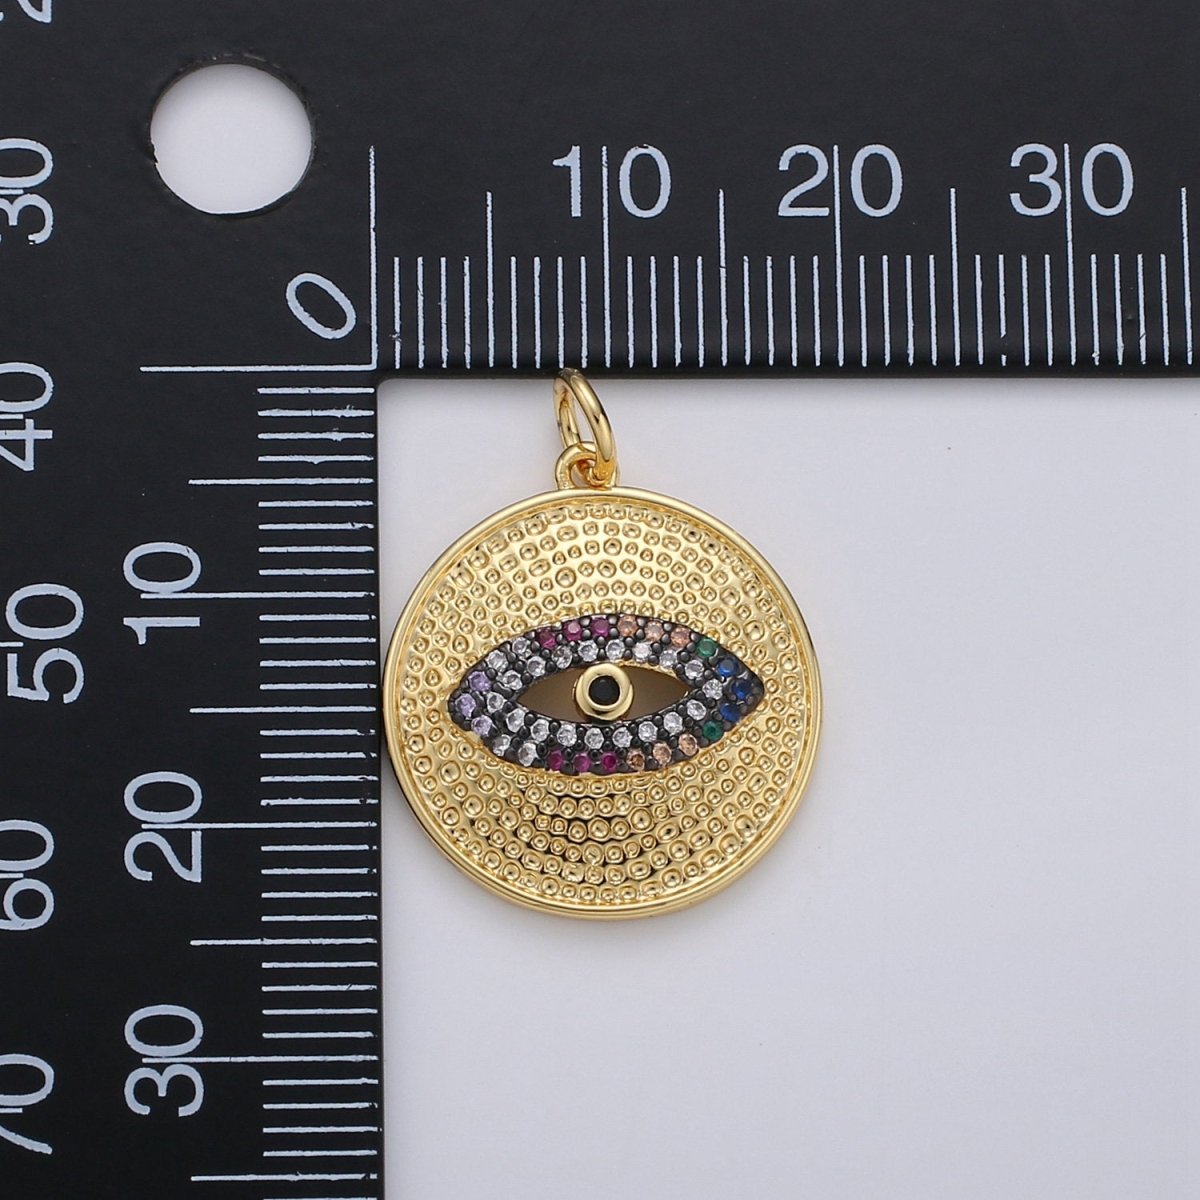 Cubic Evil Eye charm Pendant, Micro Pave Eye Medallion charms, Dainty Amulet pendant Jewelry in 14k Gold Filled D-199 - DLUXCA